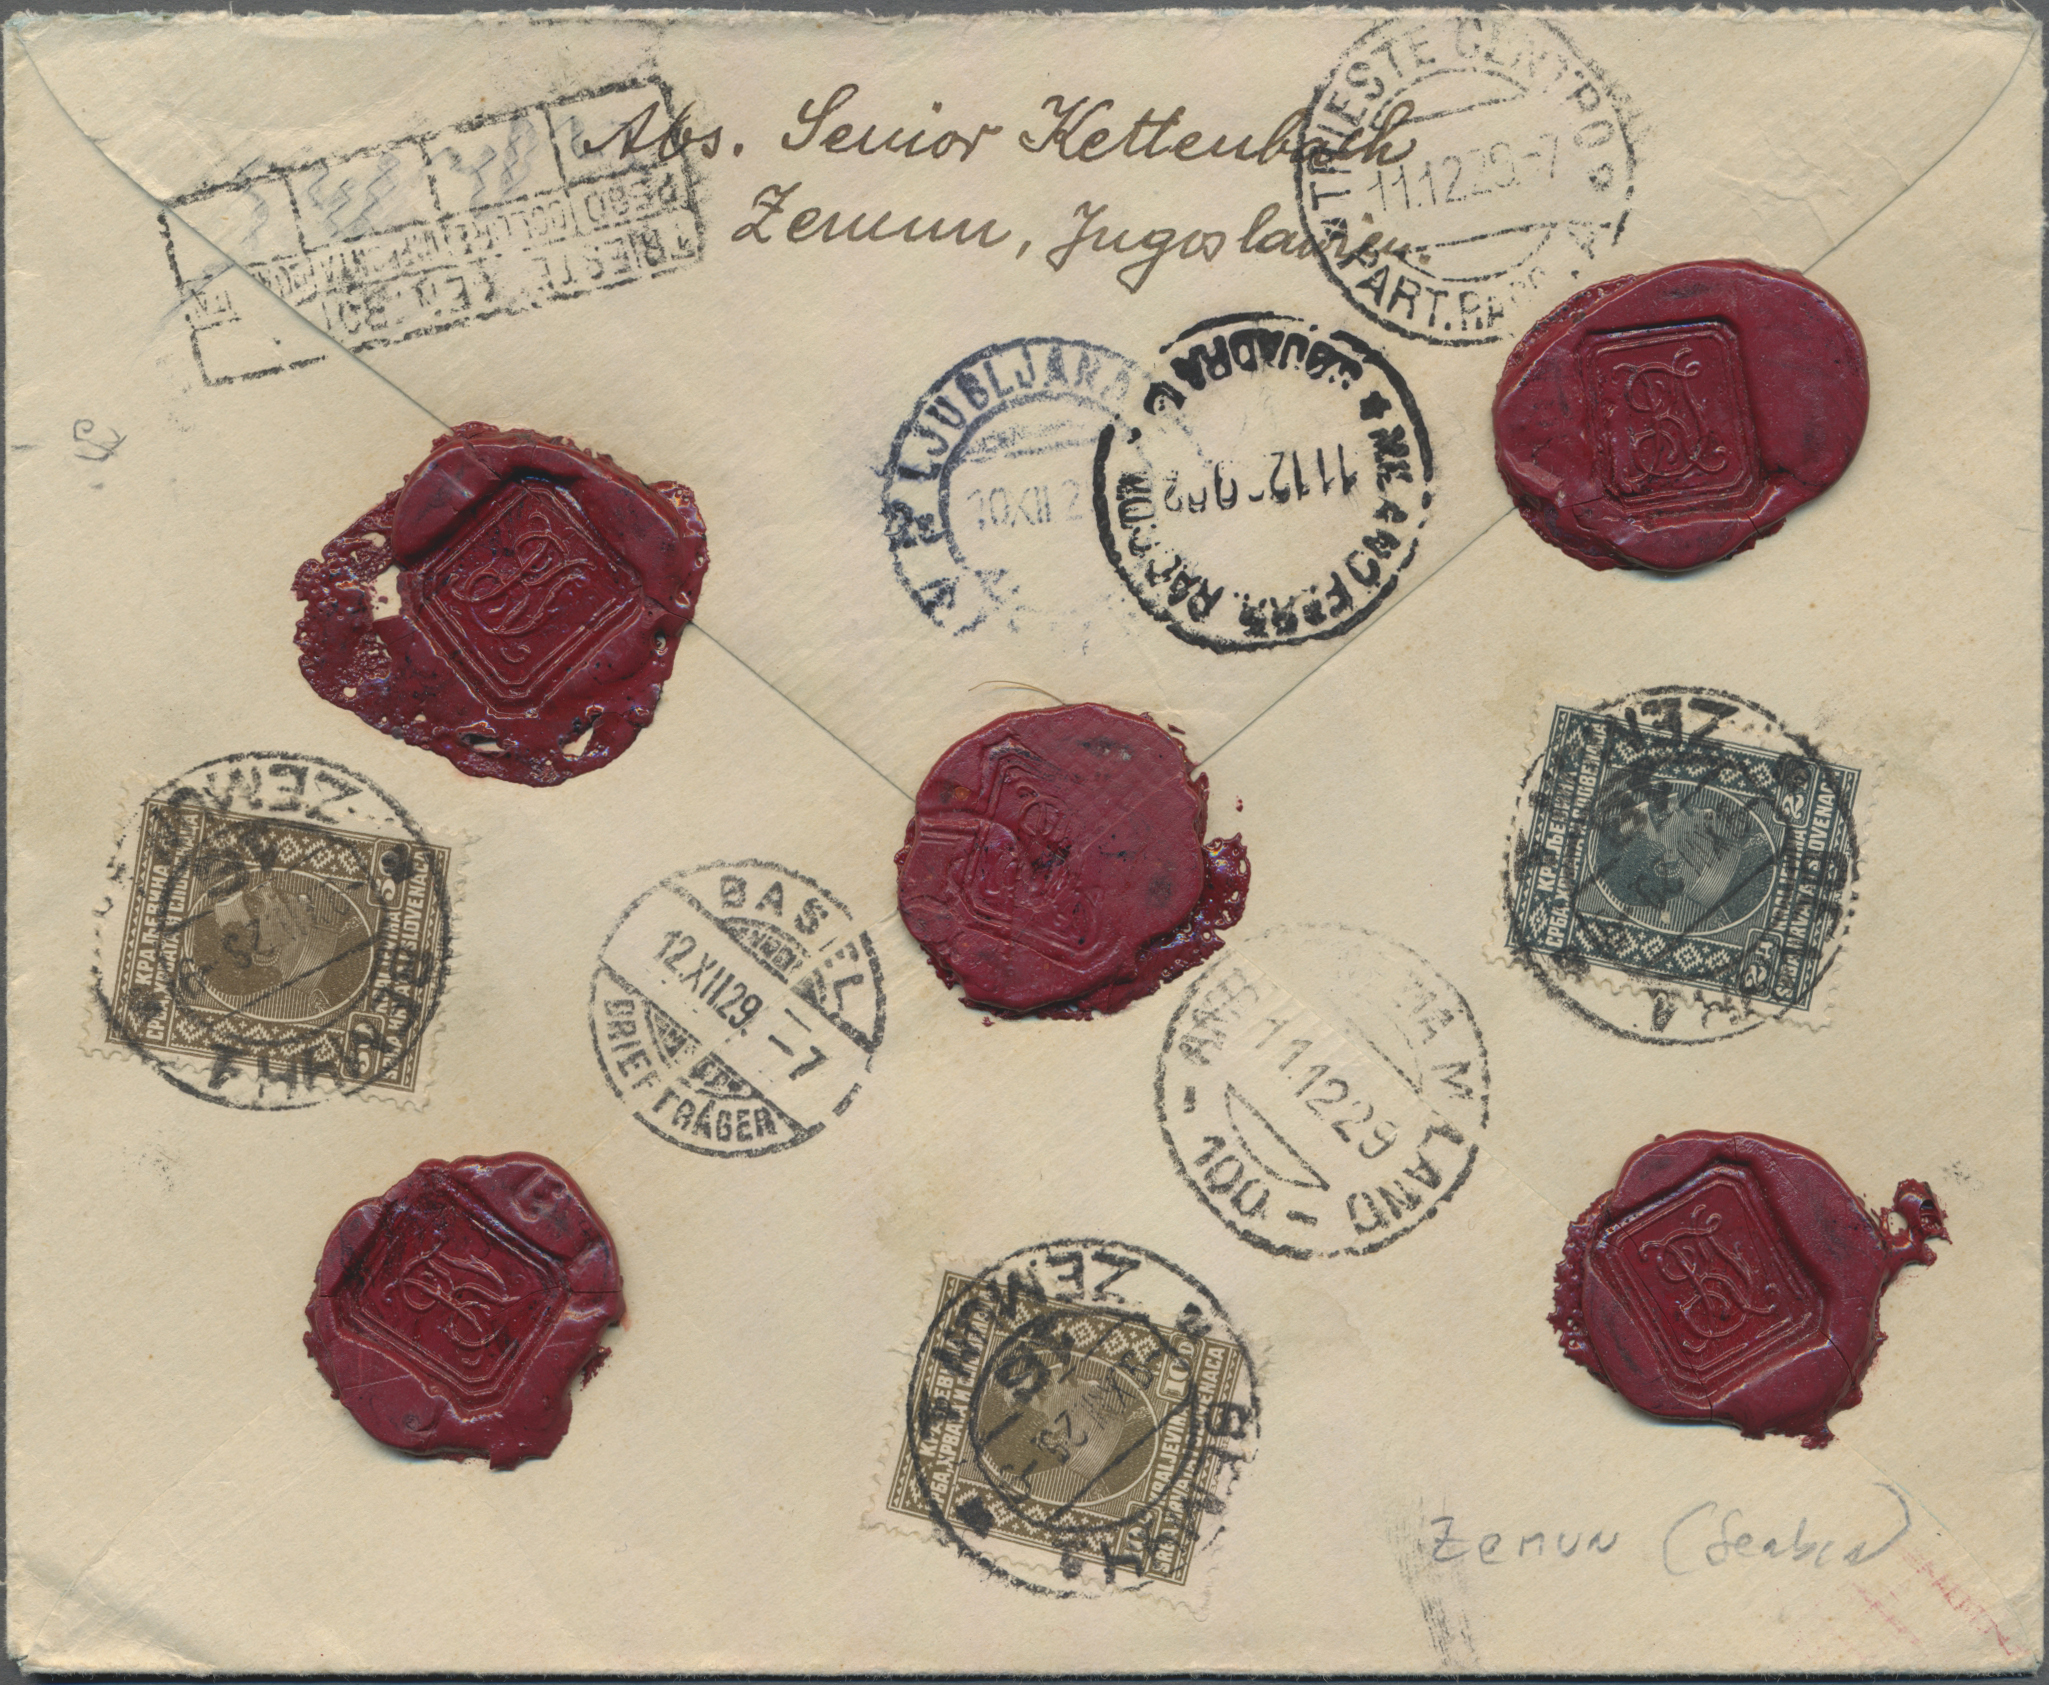 Lot 06473 - jugoslawien  -  Auktionshaus Christoph Gärtner GmbH & Co. KG 53rd AUCTION - Day 4, Collections Overseas, Air & Shipmail, Thematics, Europe